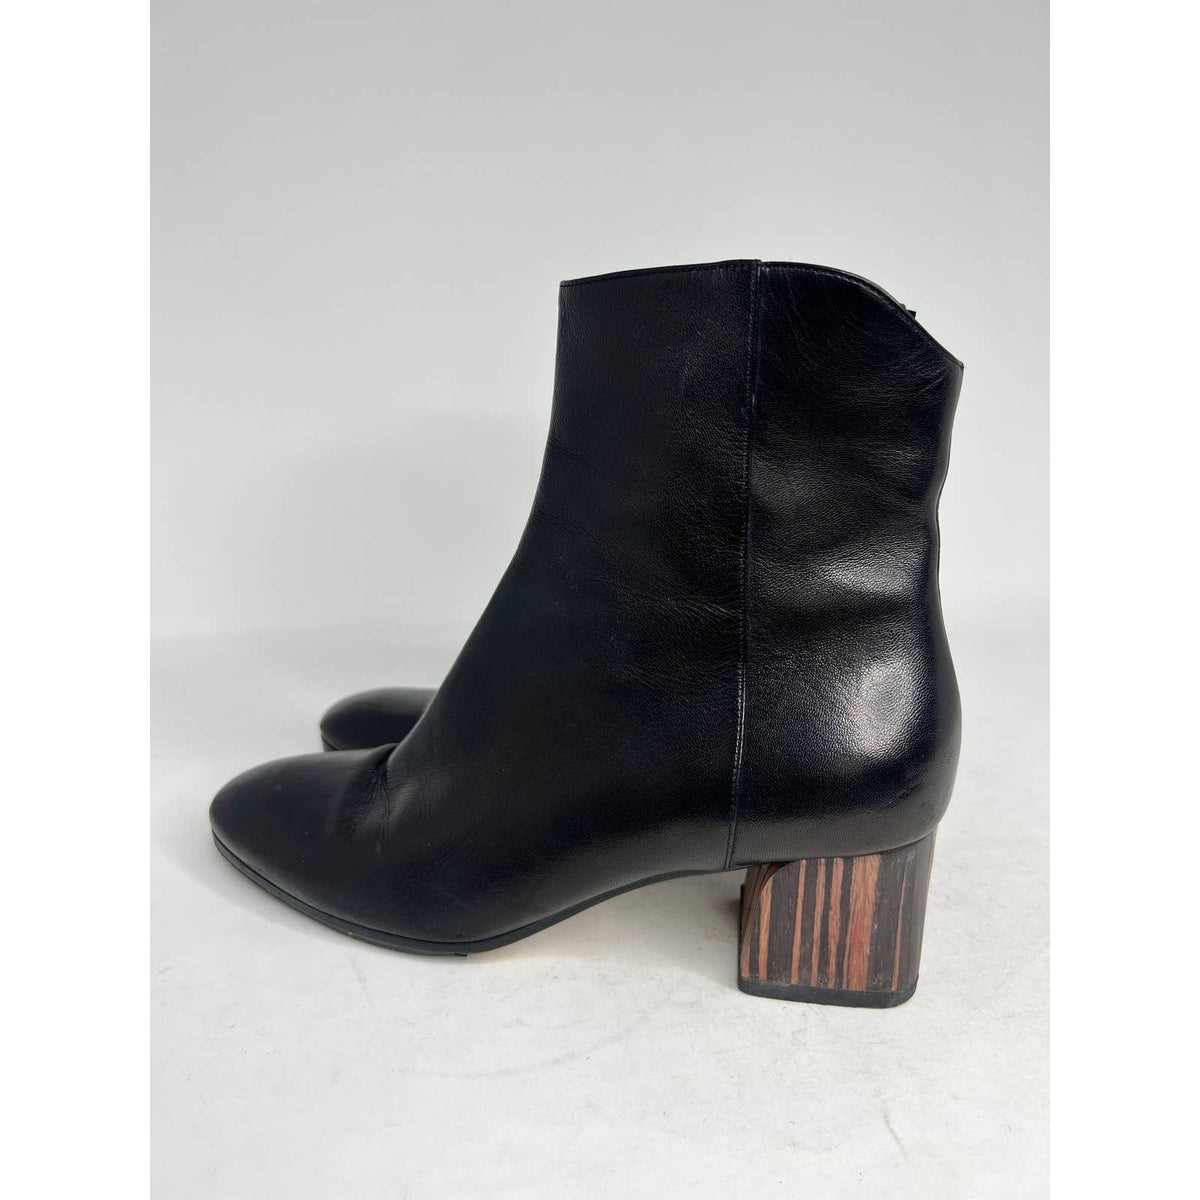 M Gemi The Corsa Concavo Leather Ankle Booties Sz.9.5(39.5)